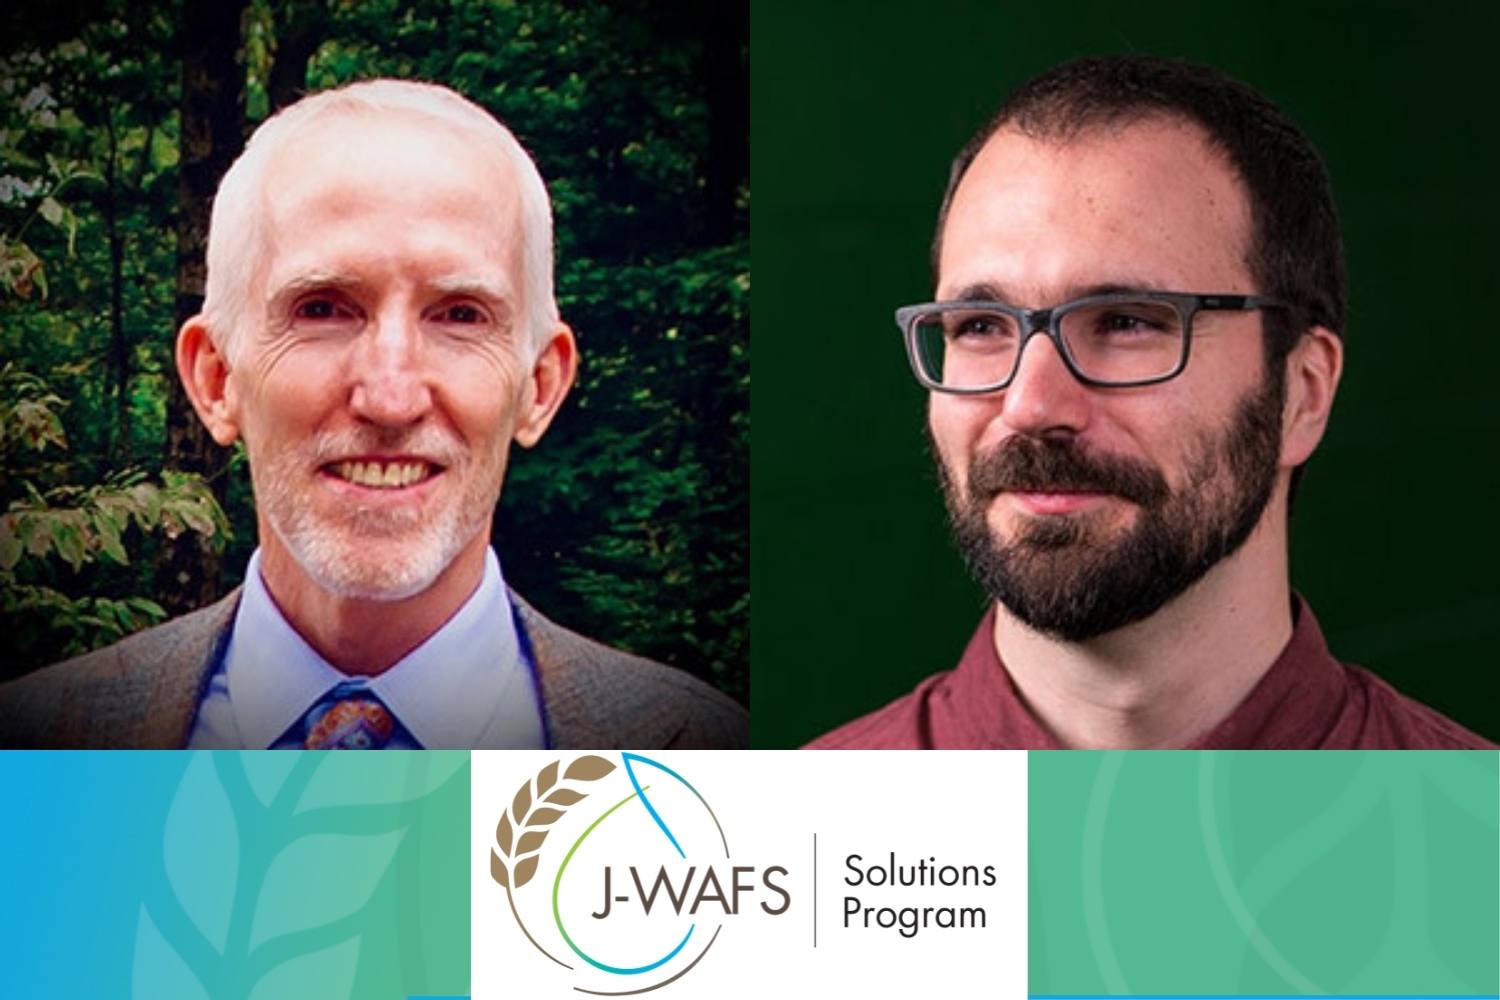 J-WAFS awards $150K Solutions grant to Patrick Doyle and team for rapid removal of micropollutants from water - MIT News